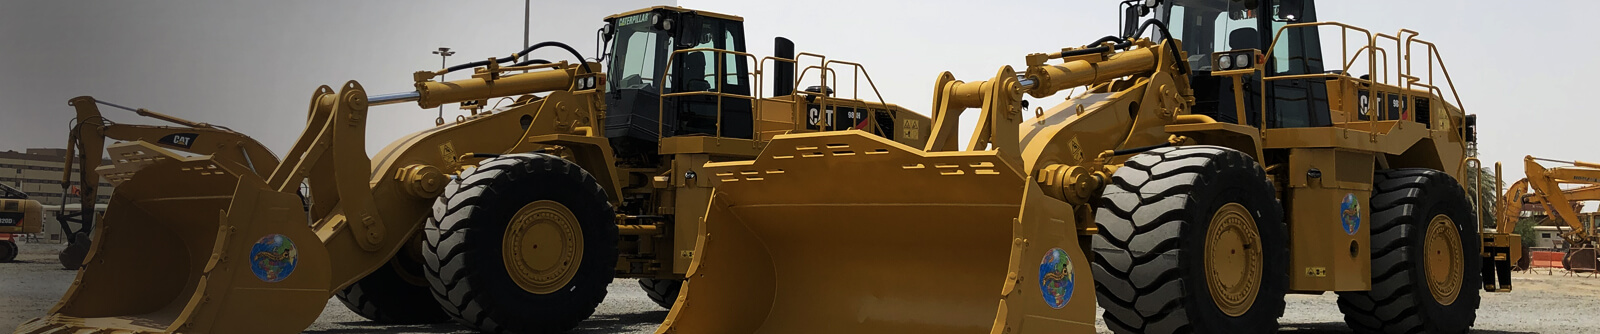 Used equipment auctions in Mexico, Ghana, USA, Canada & Chile - Southwest Global